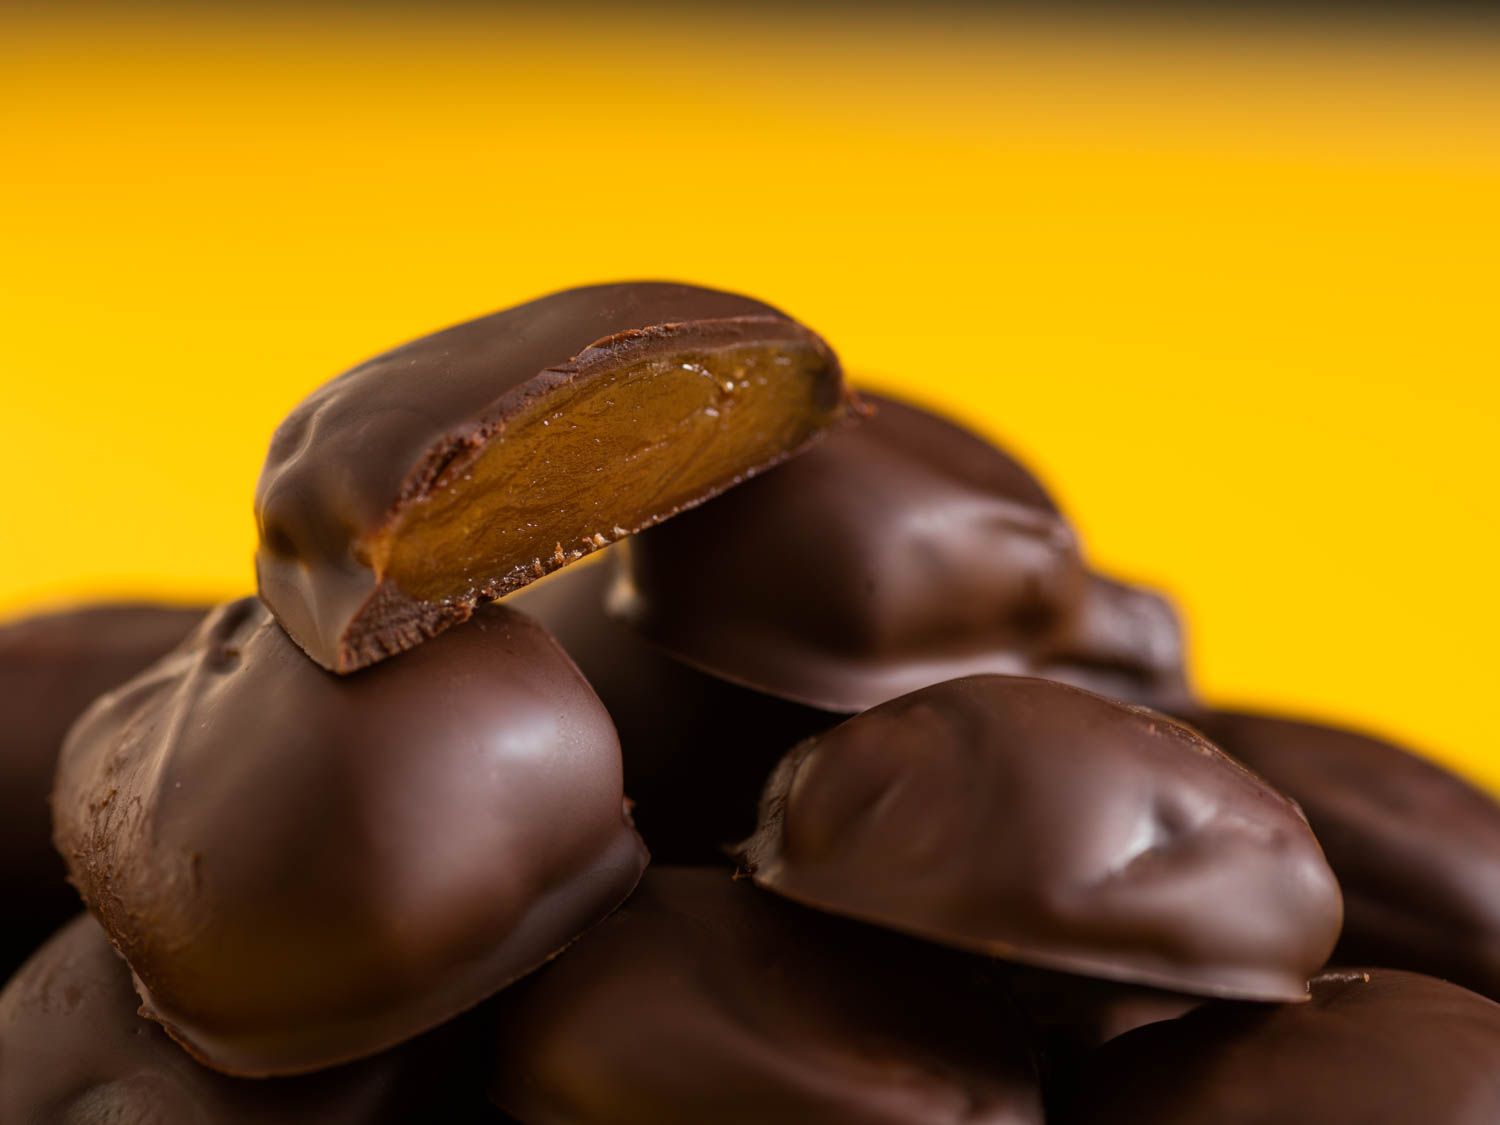 Closeup of homemade milk duds. One dud has been cut in half to reveal the caramel center.